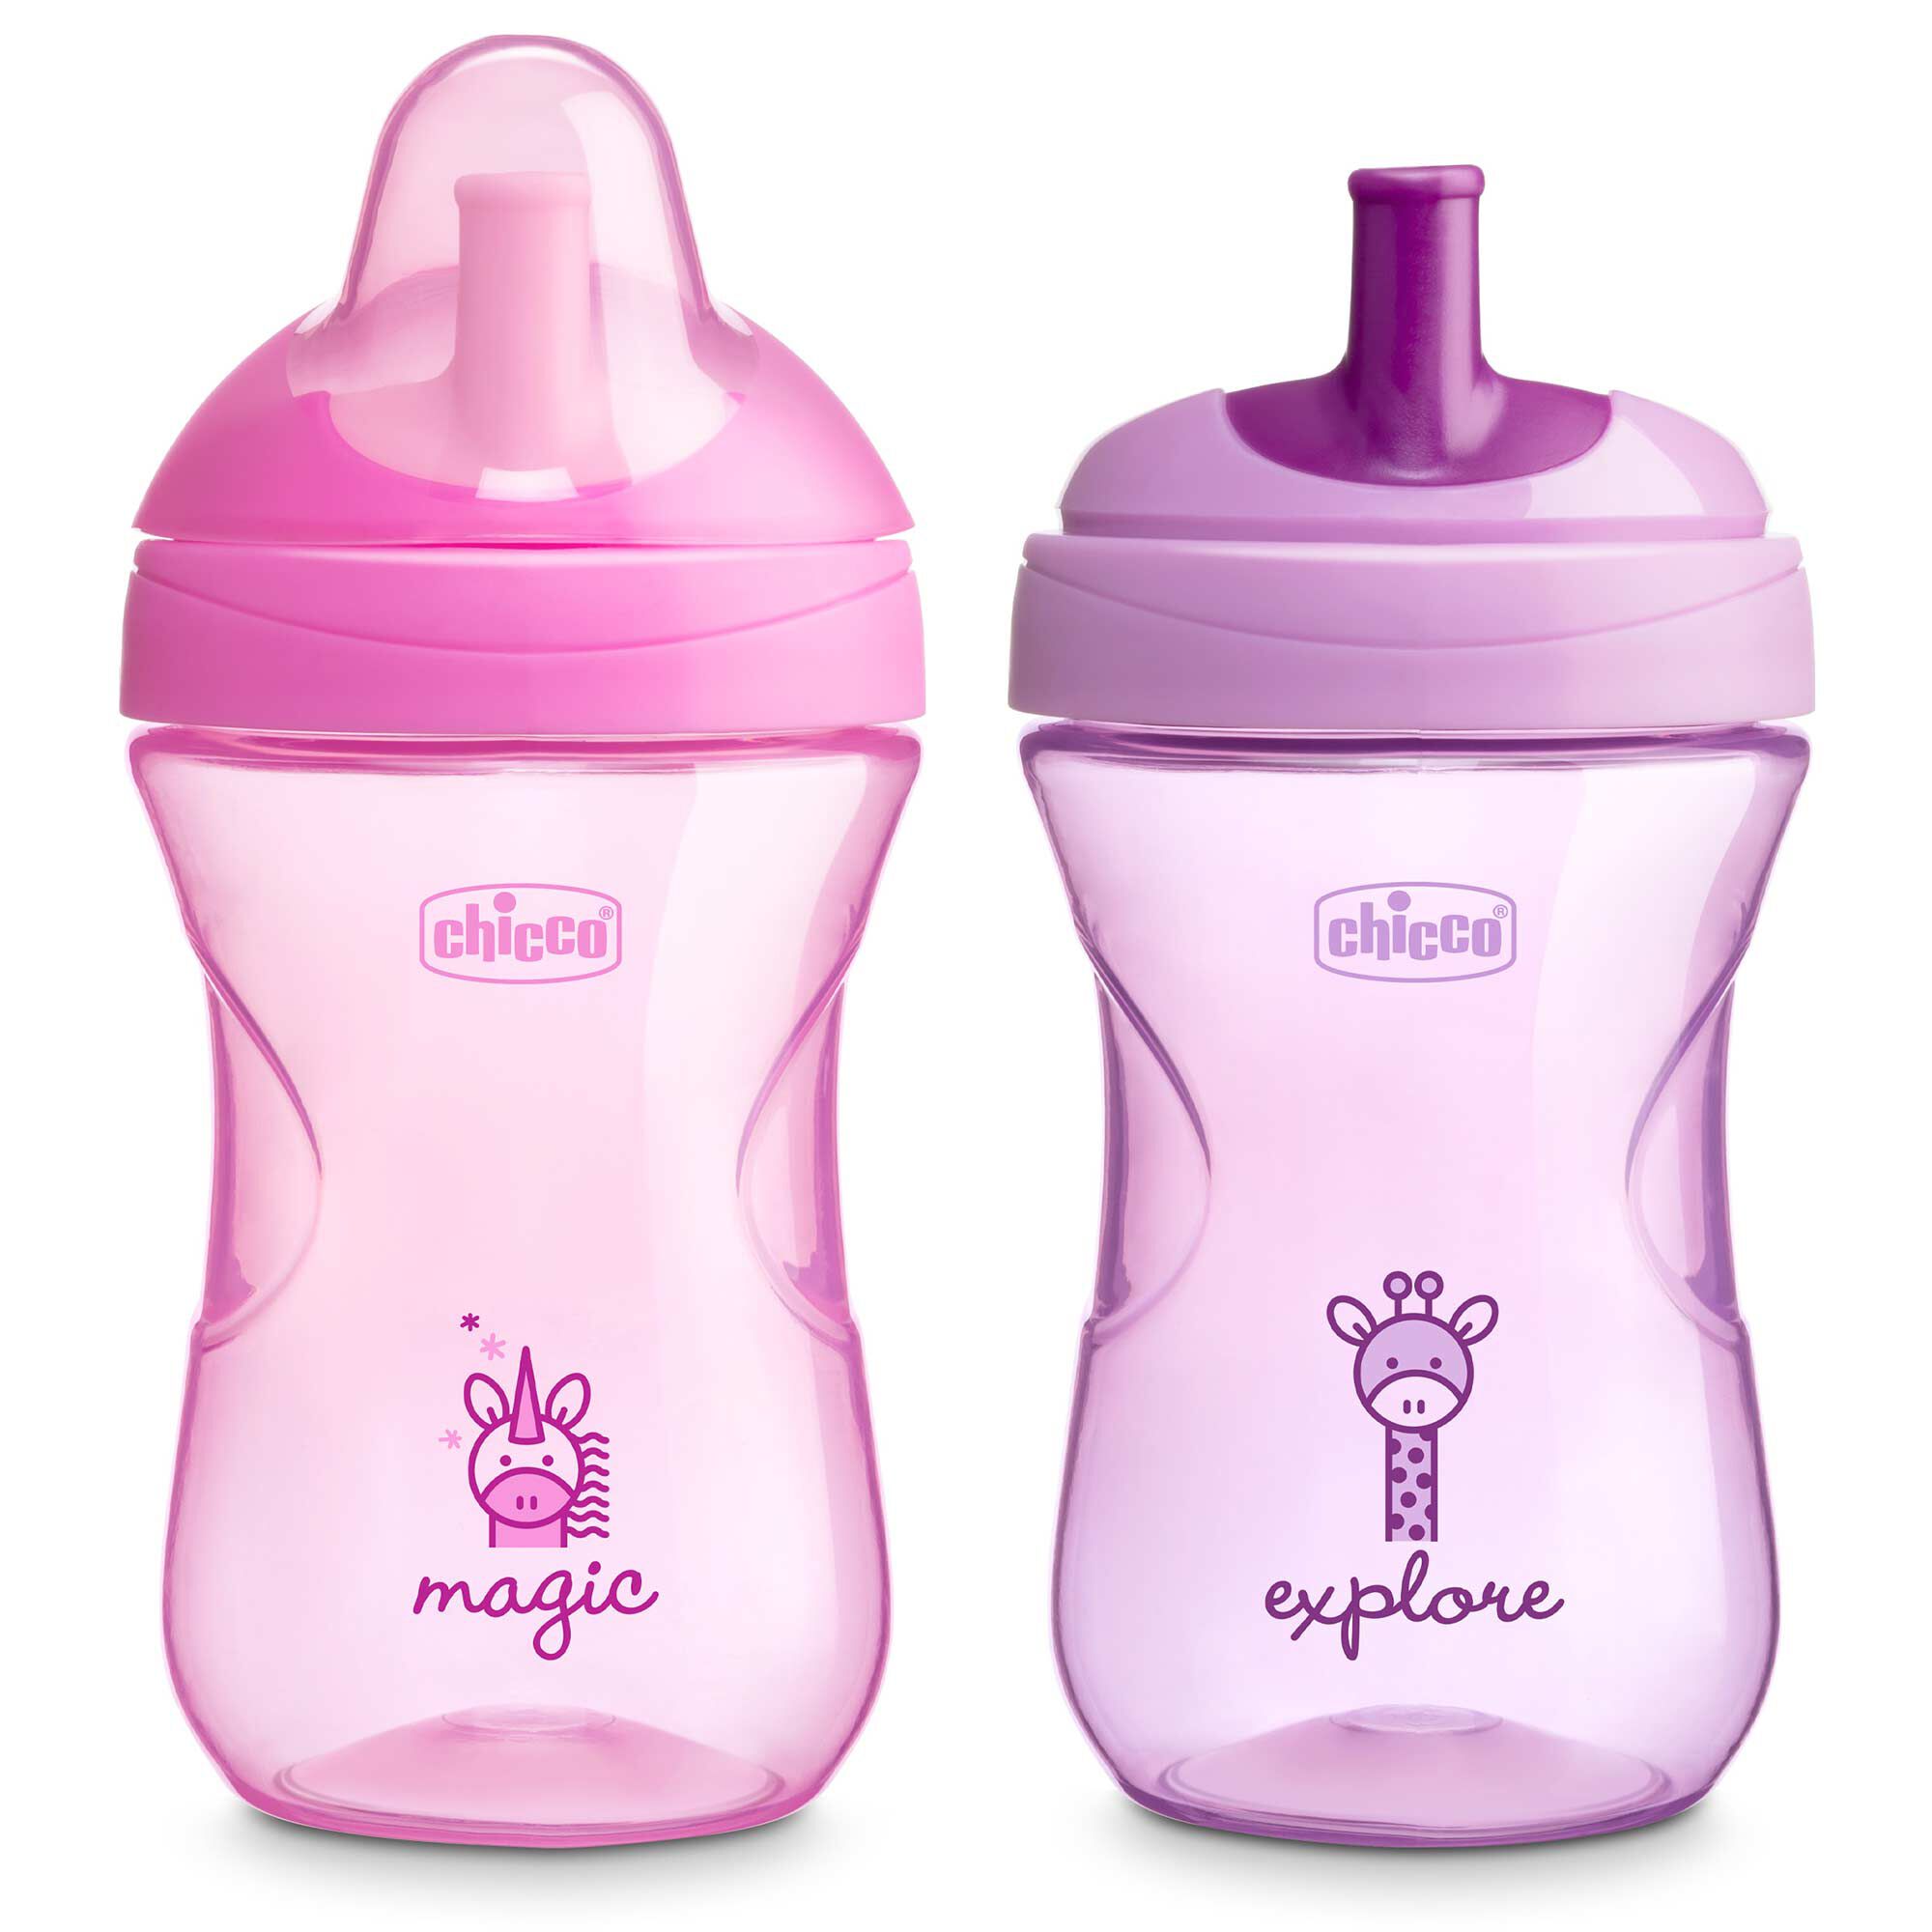 https://www.chiccousa.com/dw/image/v2/AAMT_PRD/on/demandware.static/-/Sites-chicco_catalog/default/dw3eadf357/images/products/feeding/first-straw/chicco-sport-spout-trainer-sippy-cup-9oz-9m-2pk-pale-pink-lavender.jpg?sw=2000&sh=2000&sm=fit